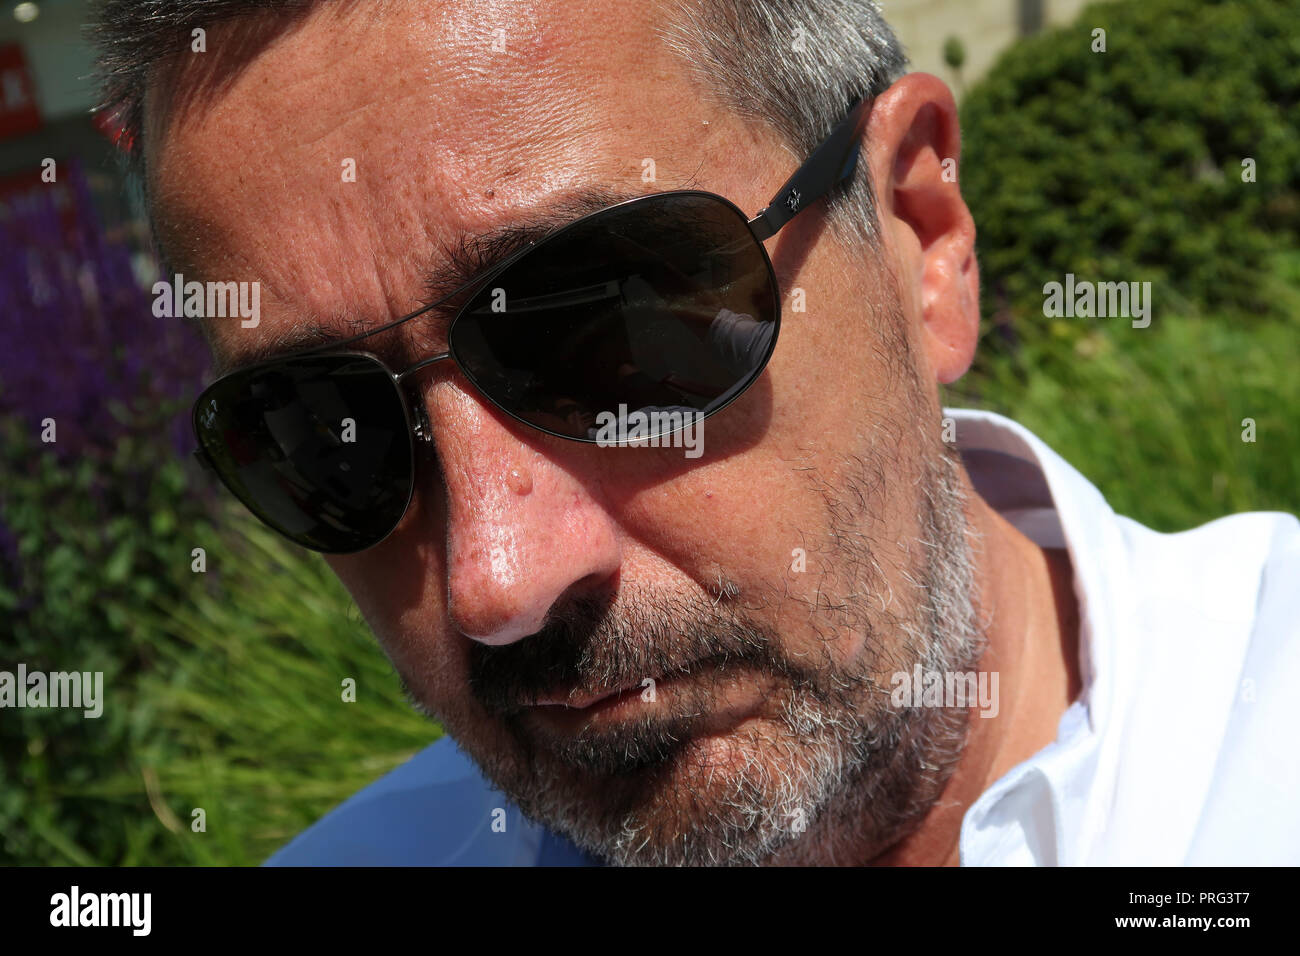 portrait of middle aged man's face with sunglasses and stubble Stock Photo